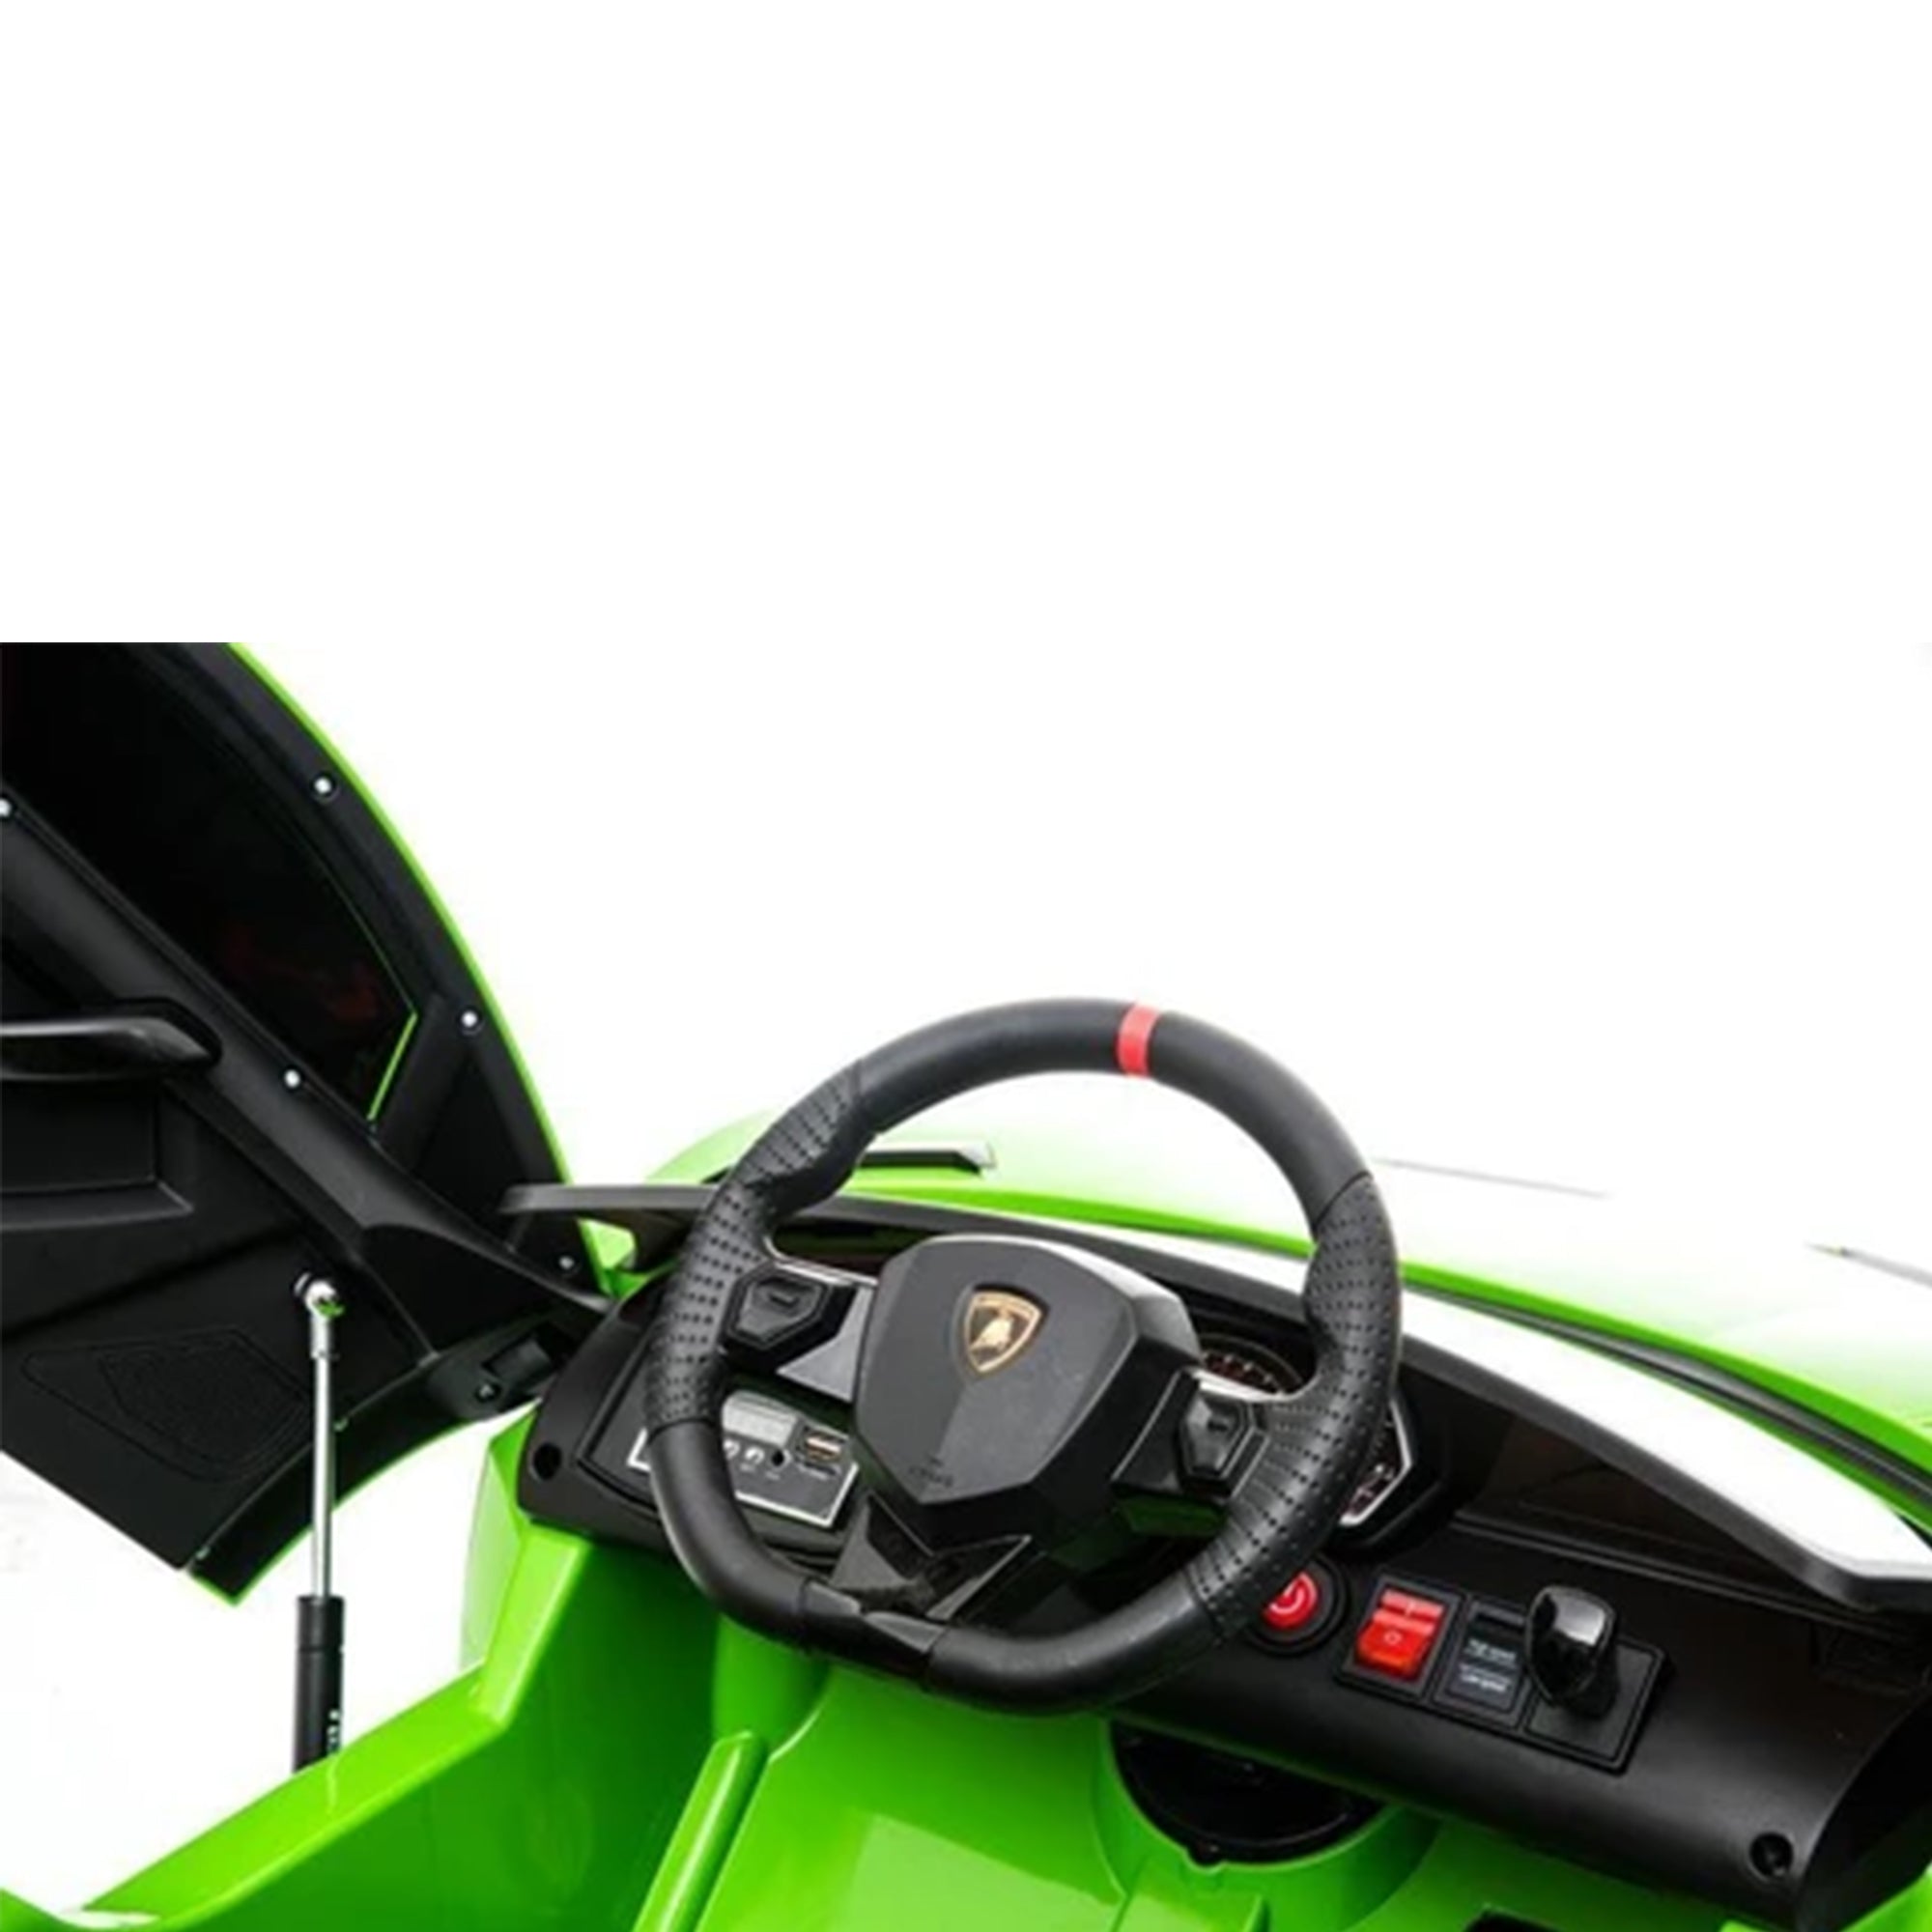 Green Lamborghini SVJ kids ride-on with parent remote control from Kids Car Store.